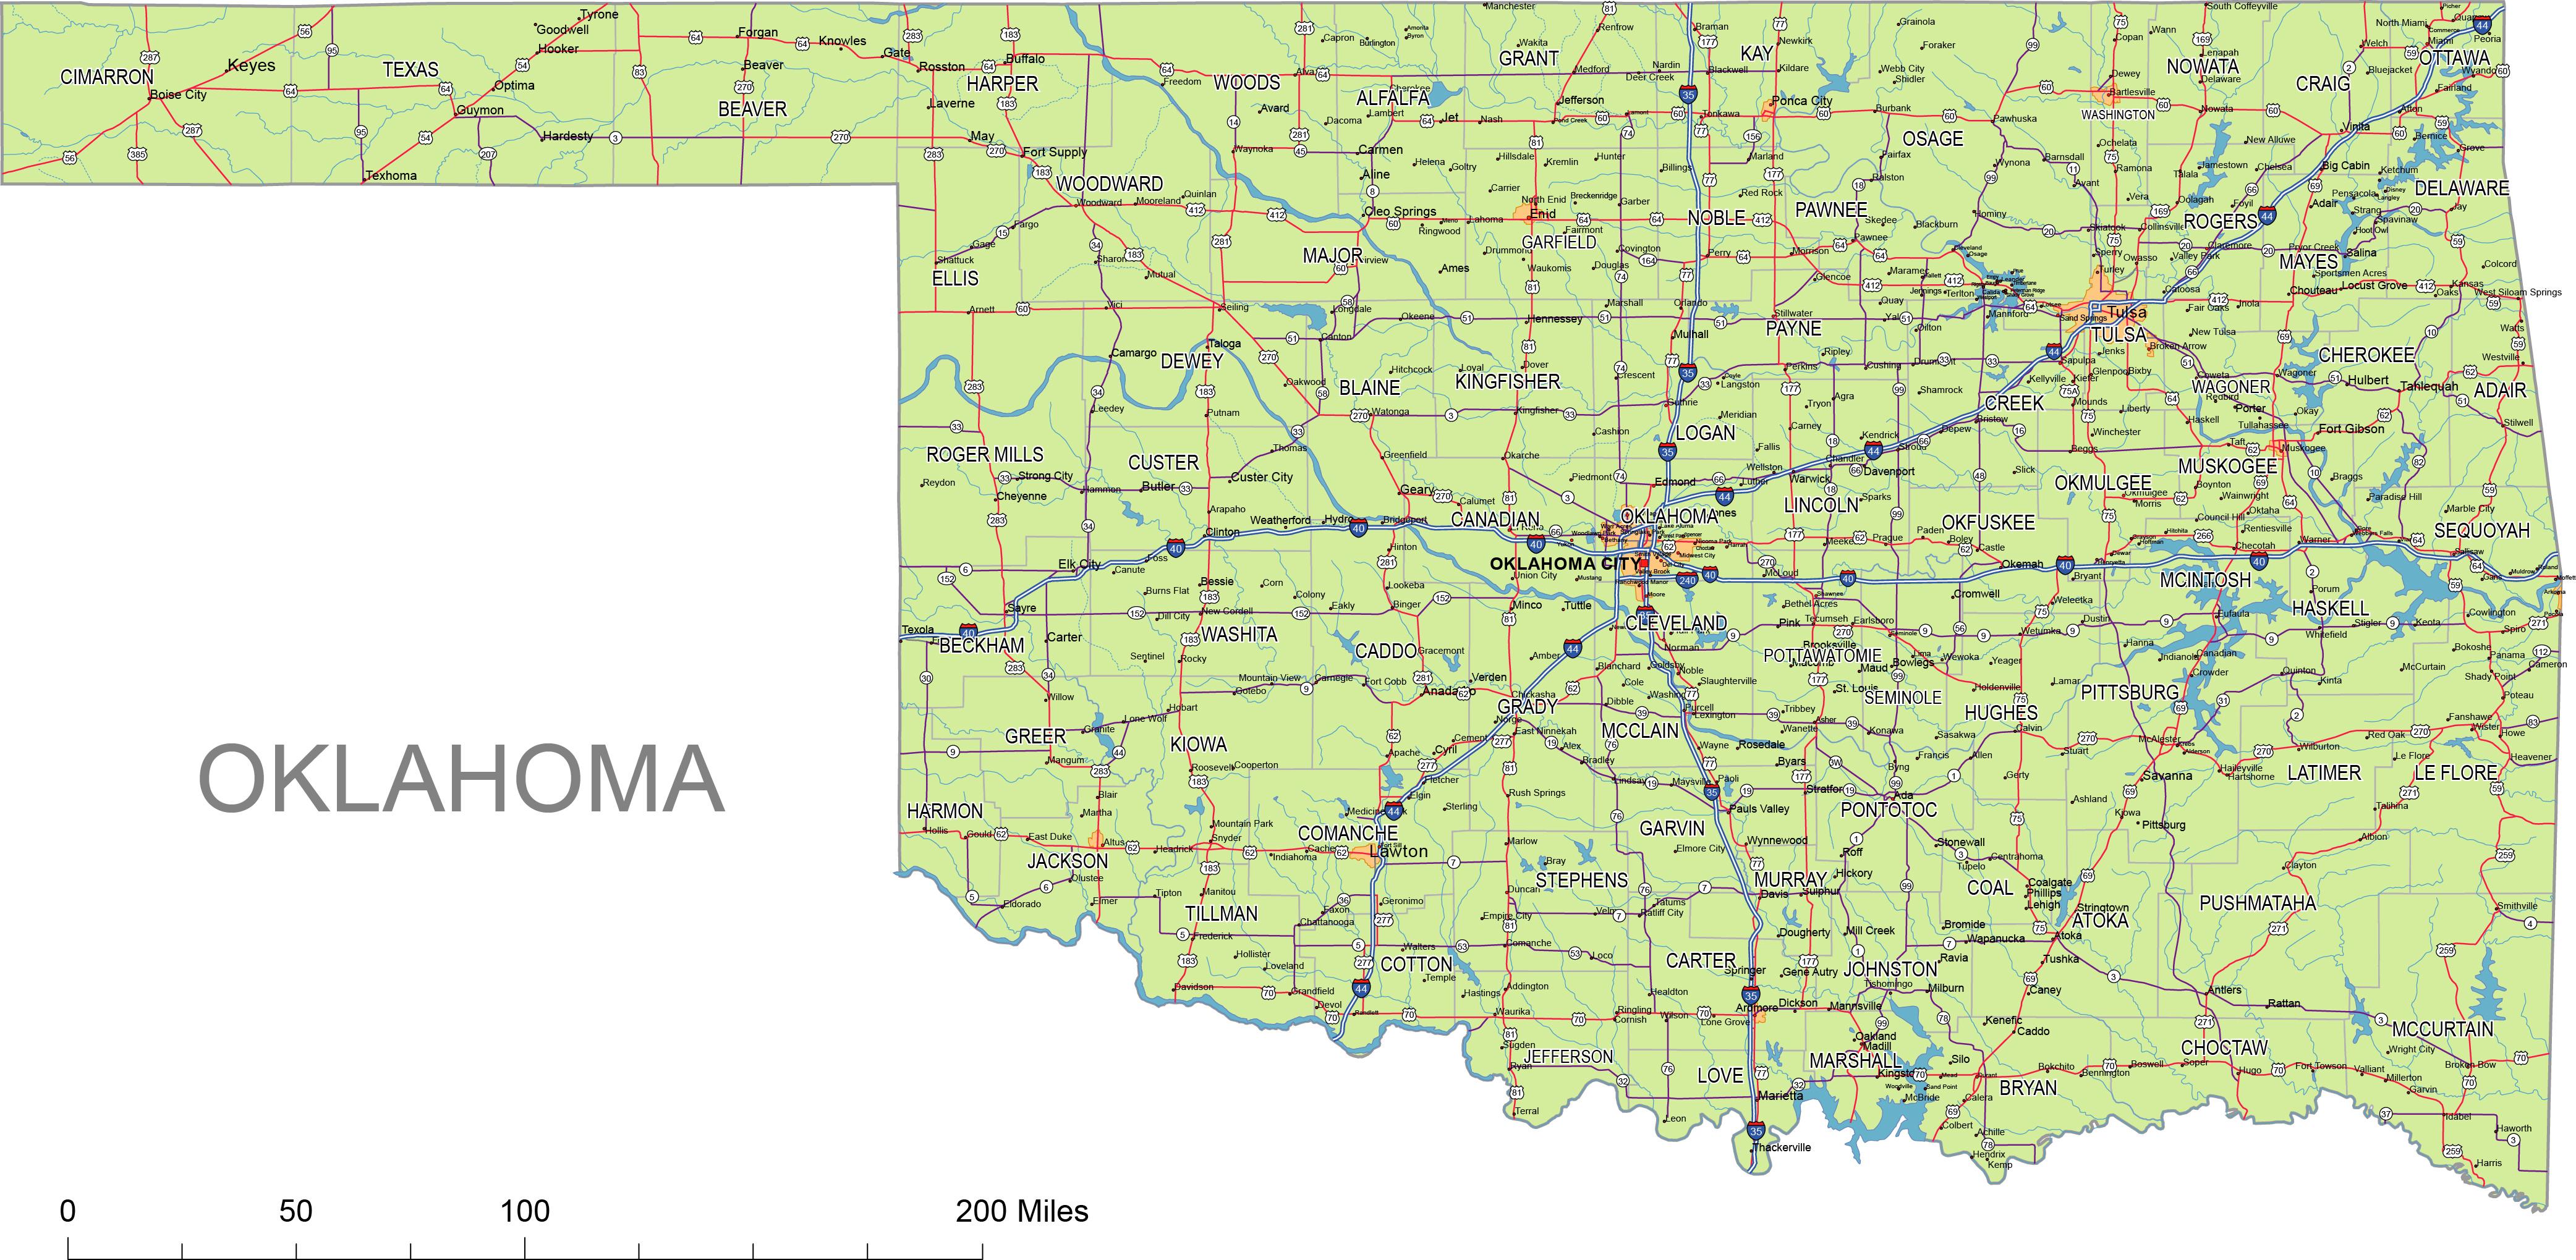 Oklahoma State Vector Road Map Lossless Scalable Aipdf Map For